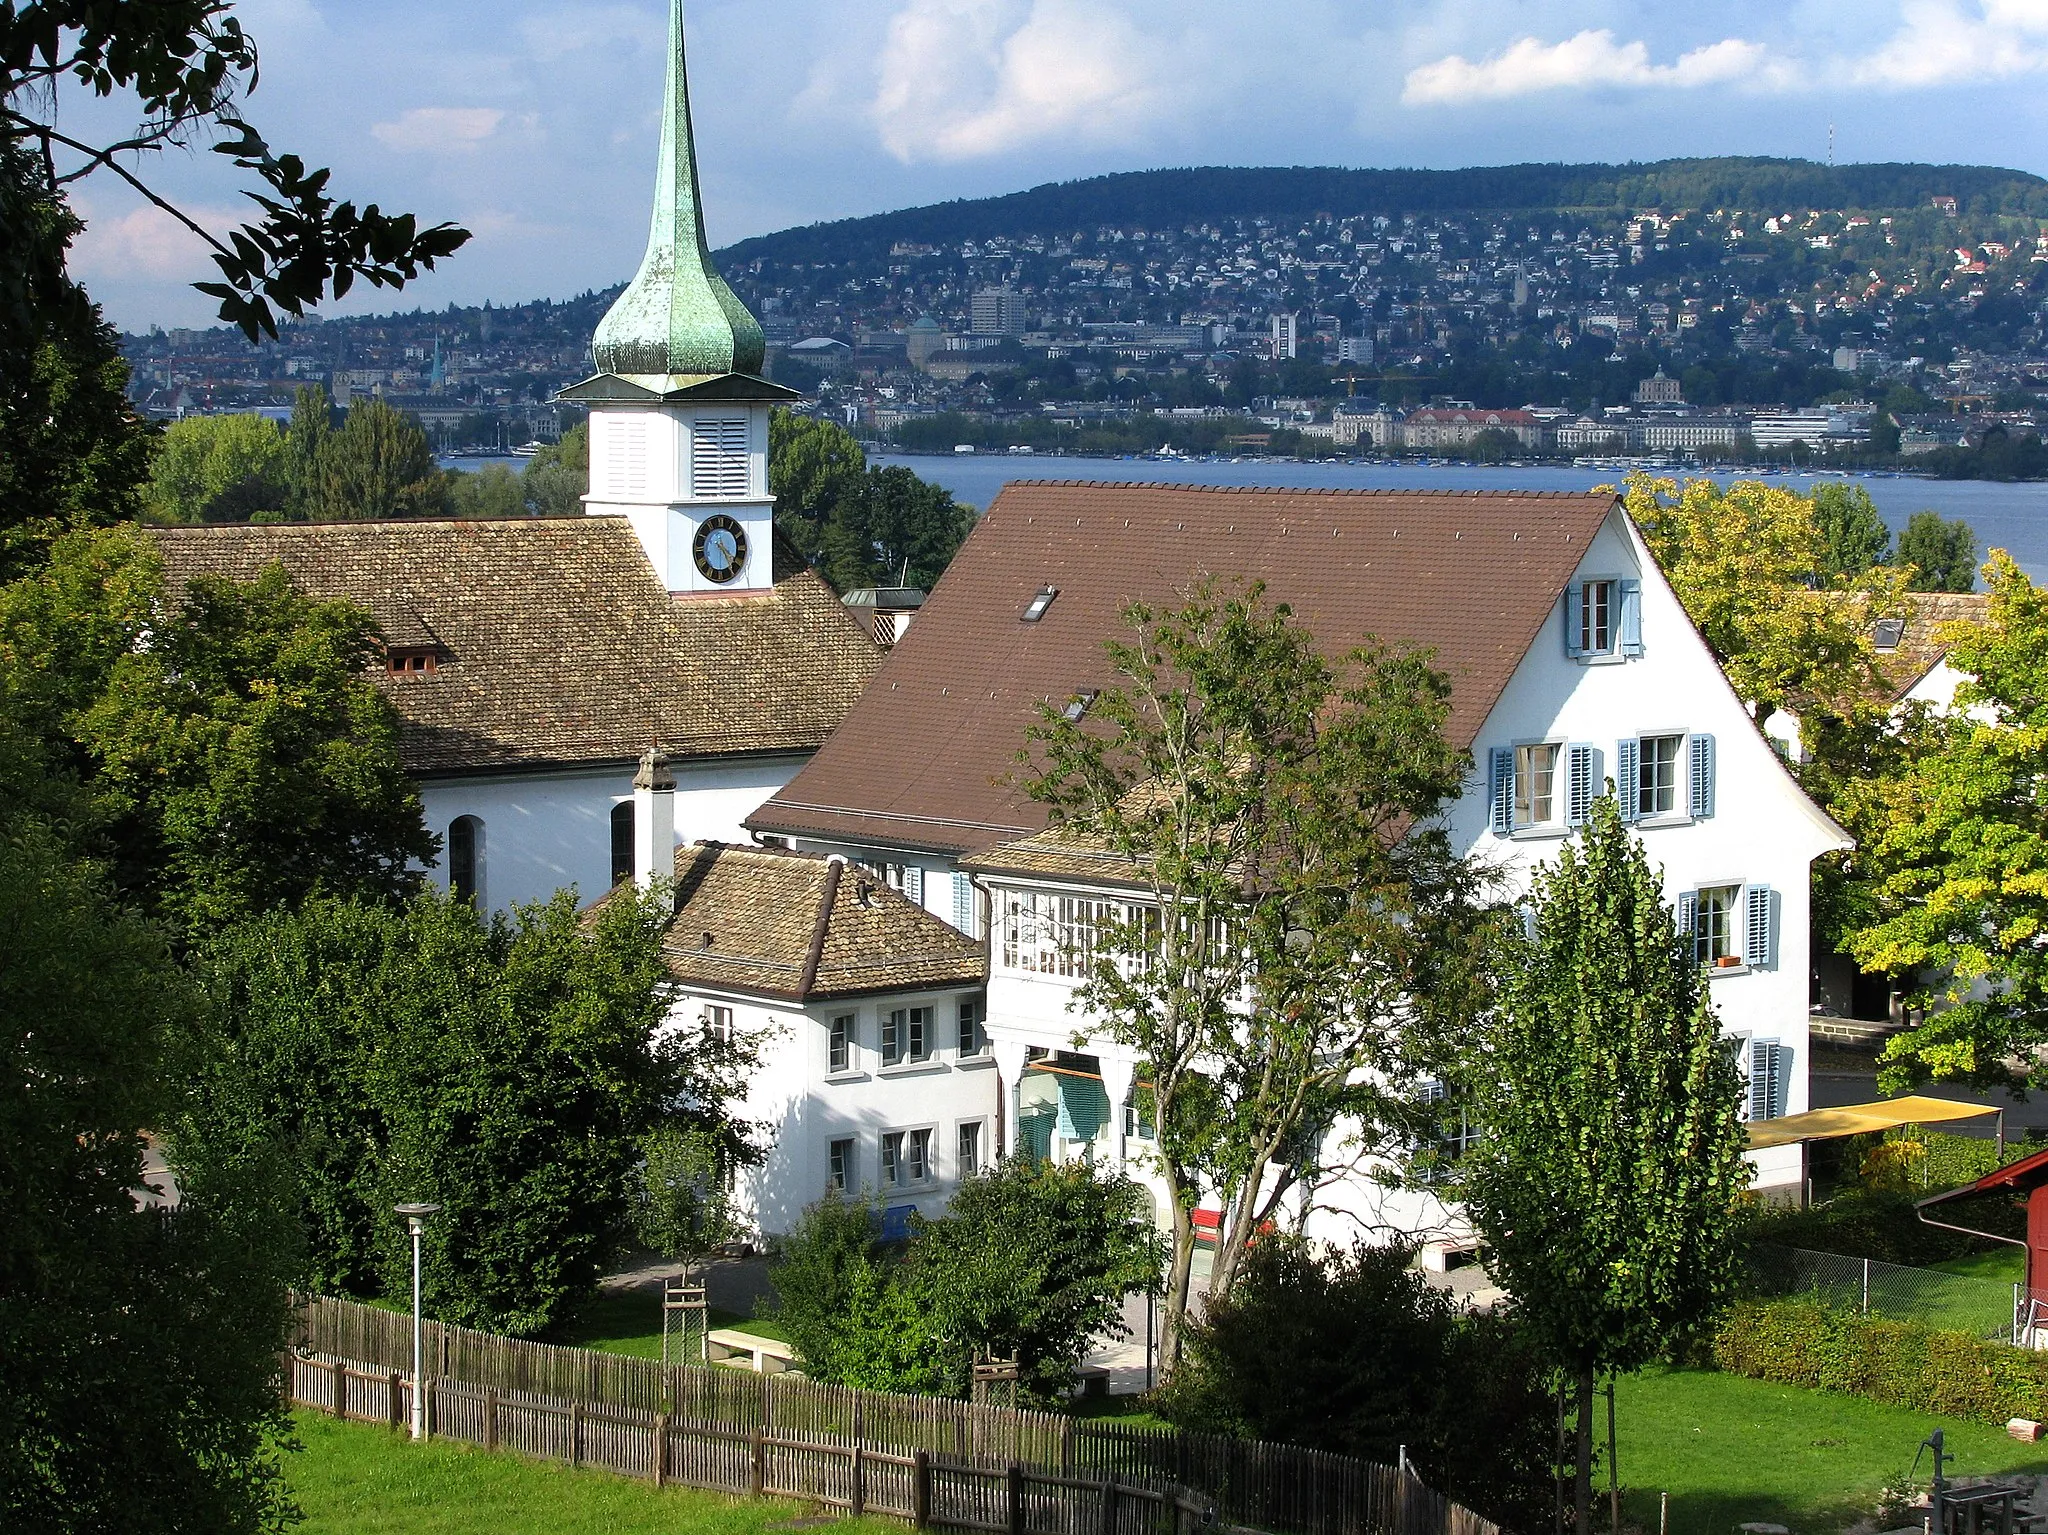 Photo showing: Zürich-Wollishofen : Alte Kirche (old church) as seen from "Neue Kirche" (new Protestant church).